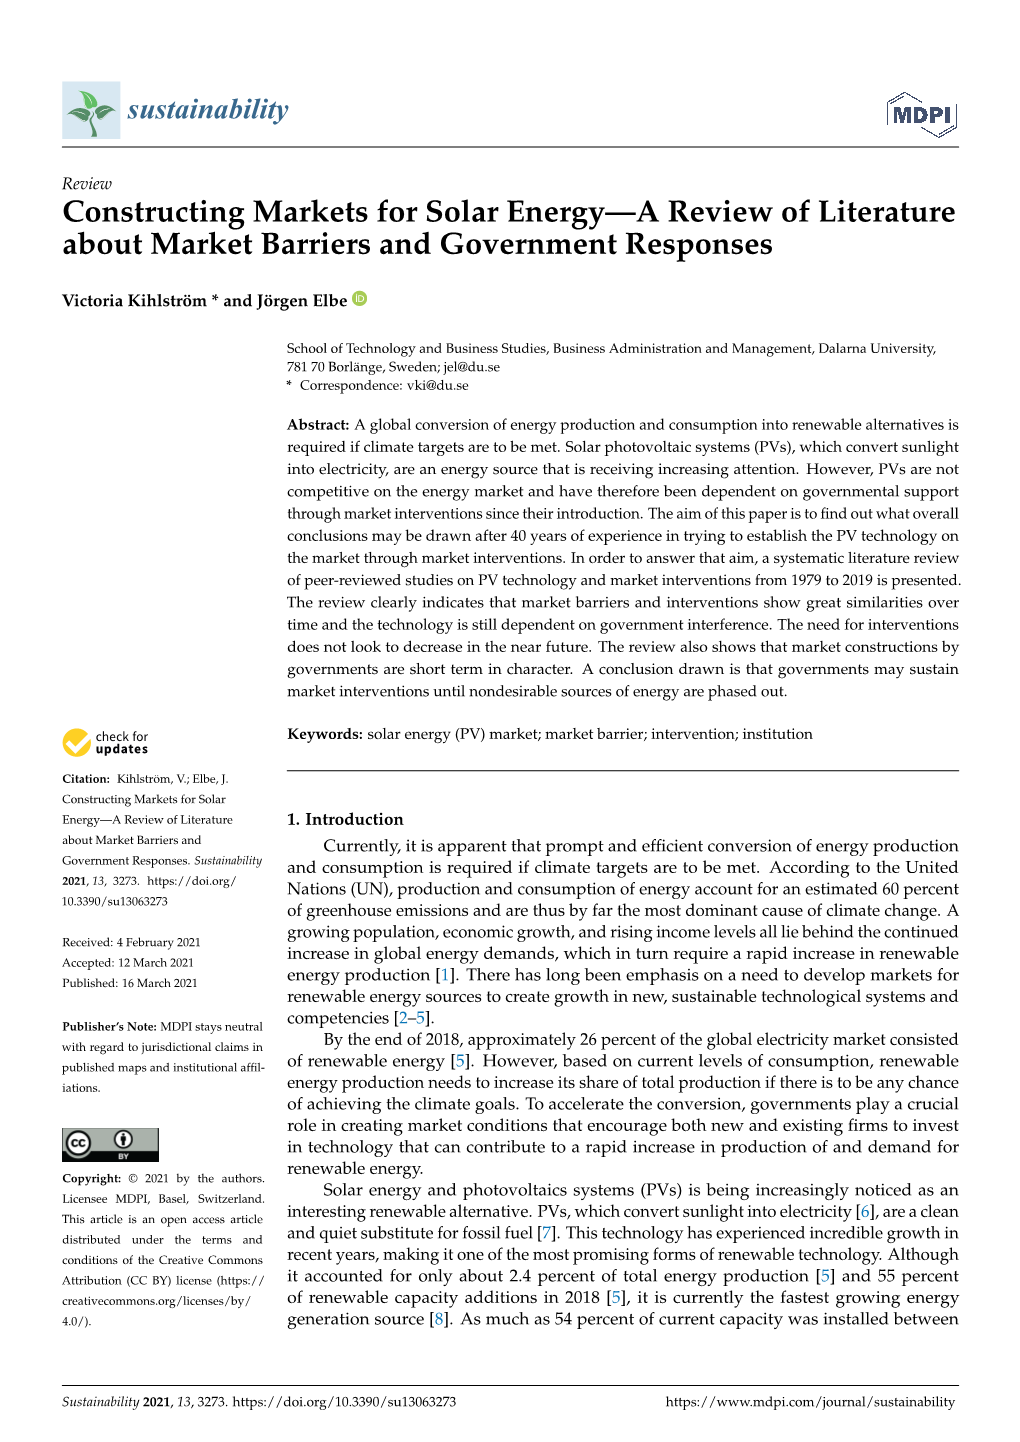 Constructing Markets for Solar Energy—A Review of Literature About Market Barriers and Government Responses